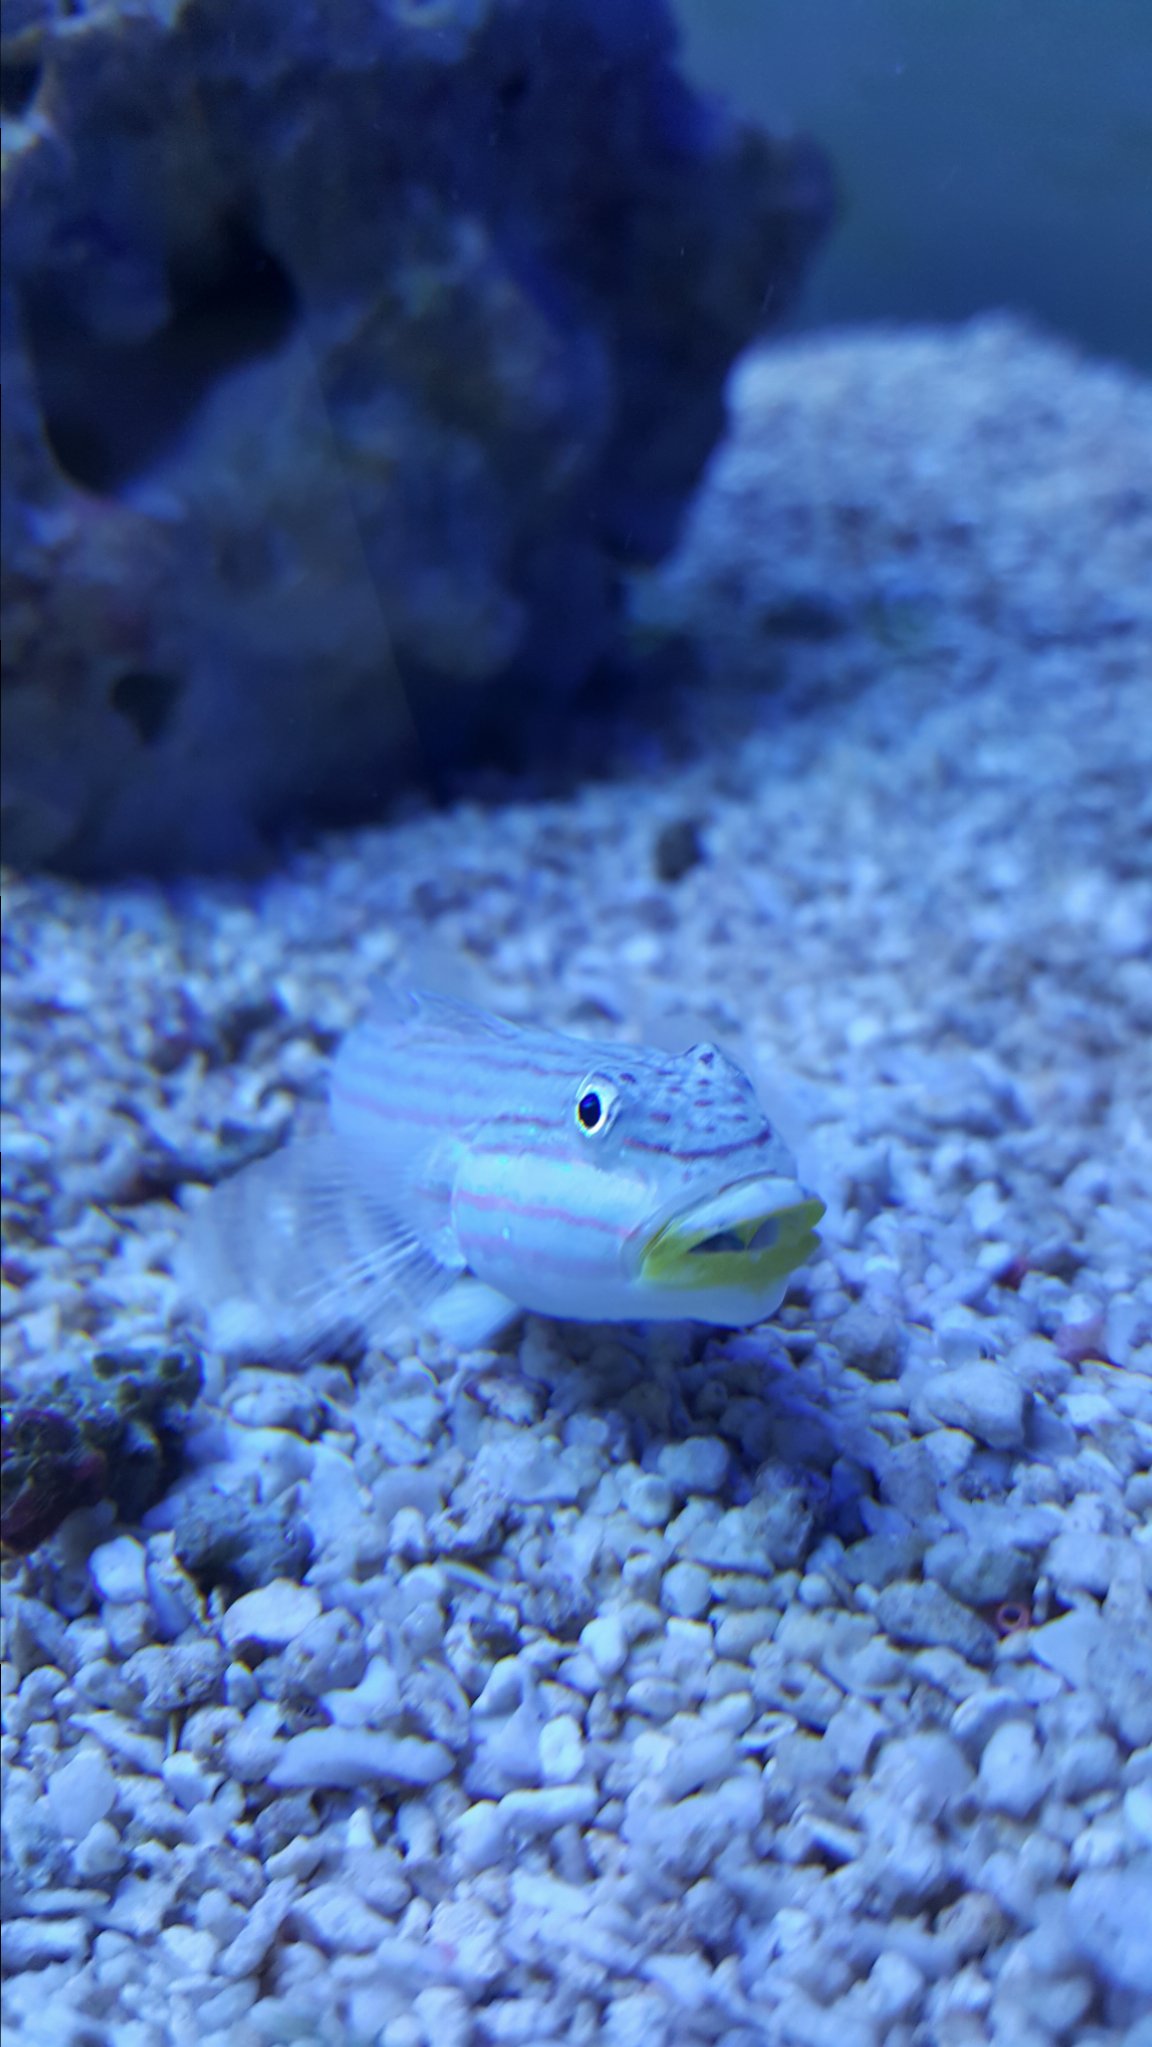 Goby3